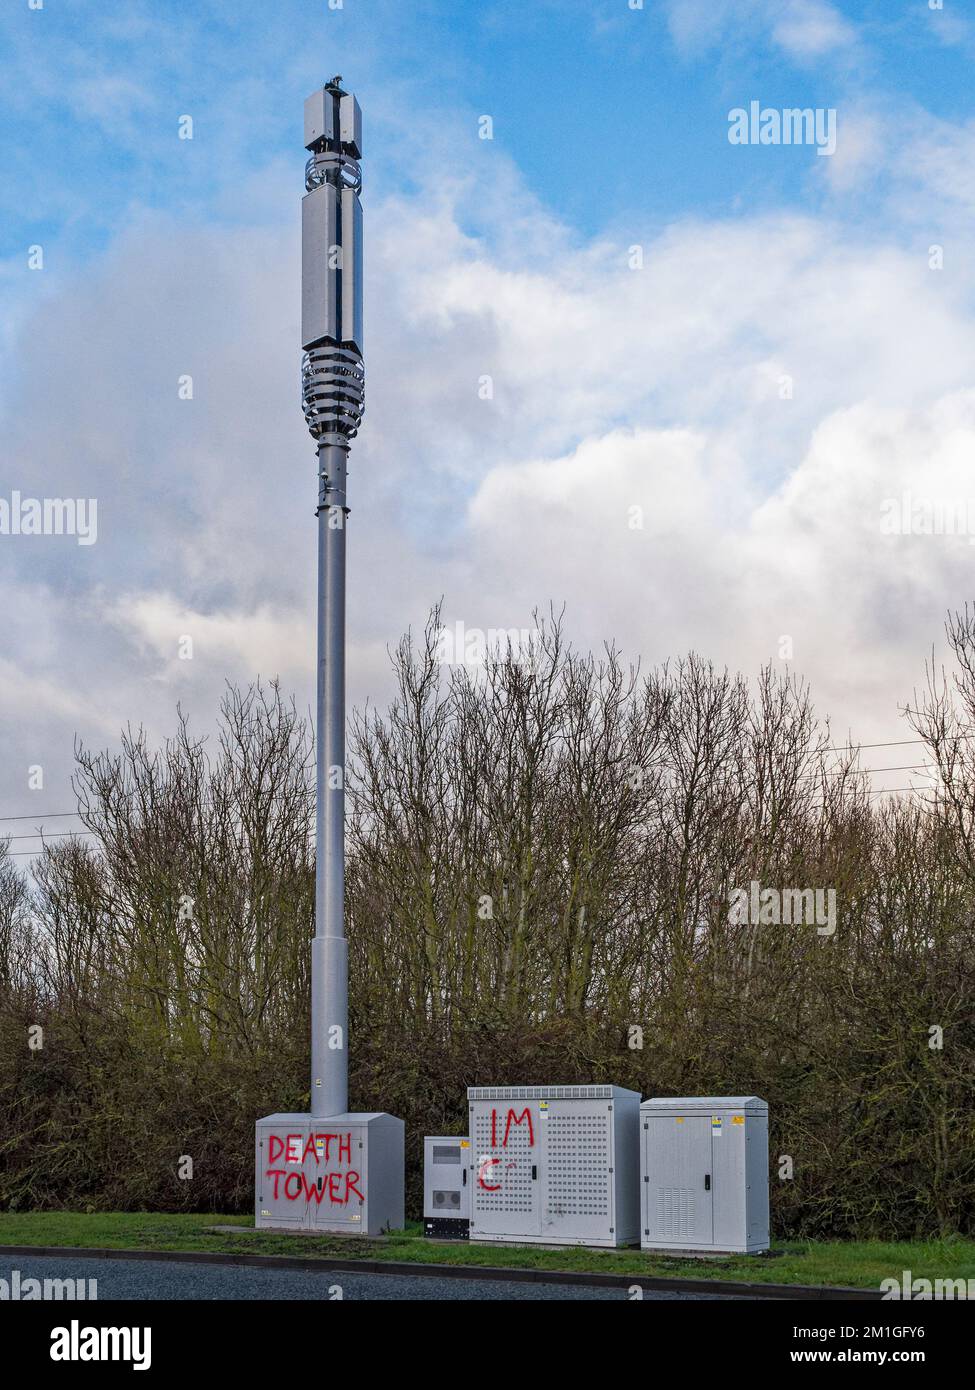 UK cell tower with graffiti Stock Photo